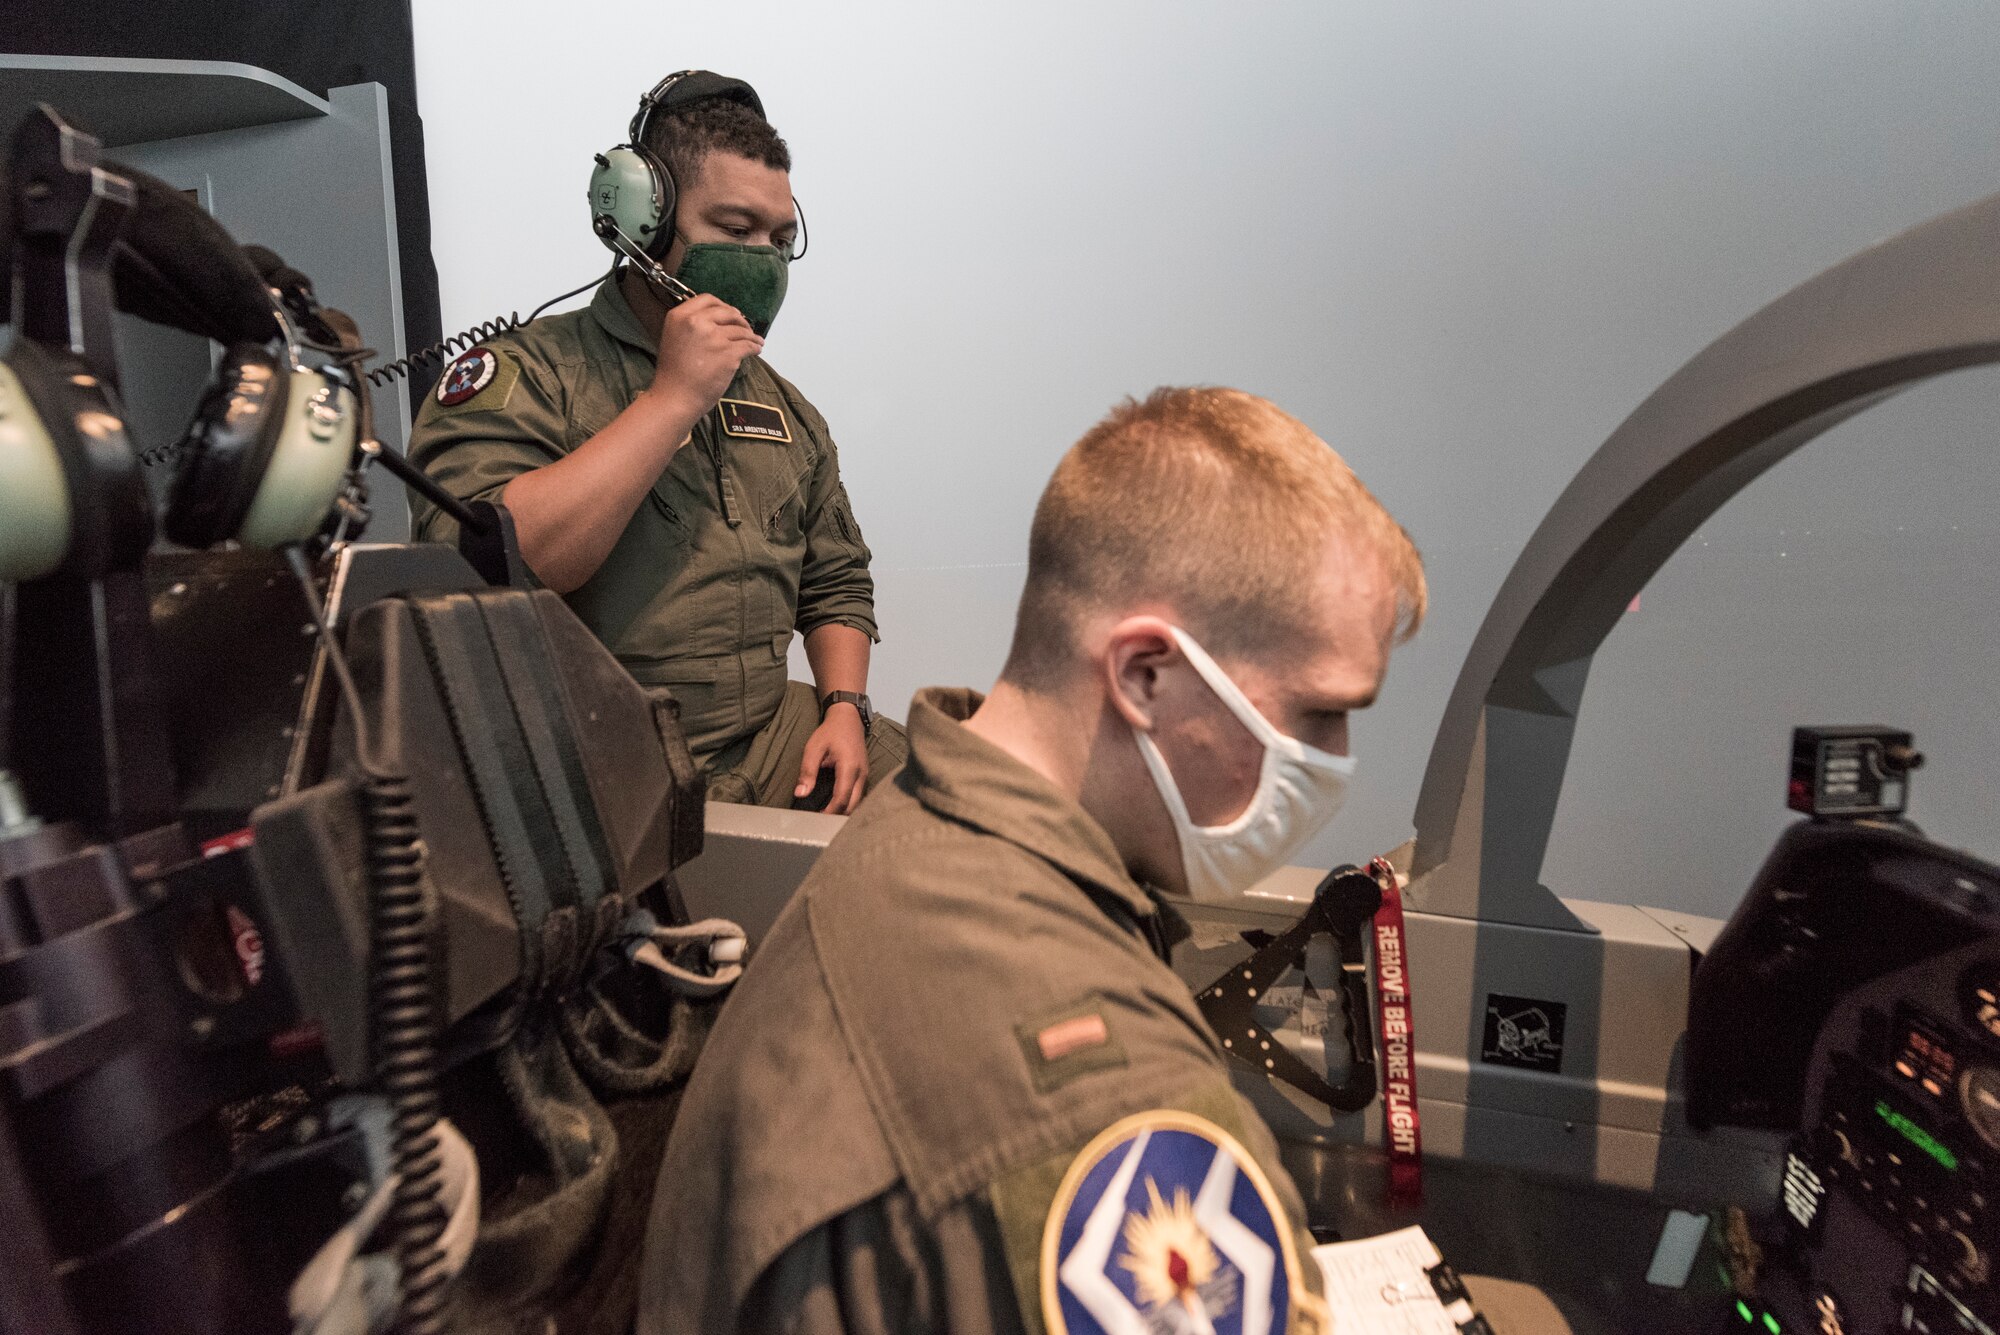 Senior Airman Brenten Boler, 47th Operations Group T-6 simulator instructor, works with 2nd Lt. Chris Summins, 47th Student Squadron student pilot, as he prepares for a flight in the T-6A Texan II simulator, August 31, 2020, at Laughlin Air Force Base, Texas. “I value the job I have now because it gives me the opportunity to pass on the knowledge that I have as a military aviator, as well as an opportunity to work on my own skills and improve my understanding of concepts by teaching them to curious students,” Boler said. “I find the work as an instructor to be incredibly rewarding and enjoy working with the student pilots to help them develop their understanding and skills.” (U.S. Air Force photo by Senior Airman Anne McCready)